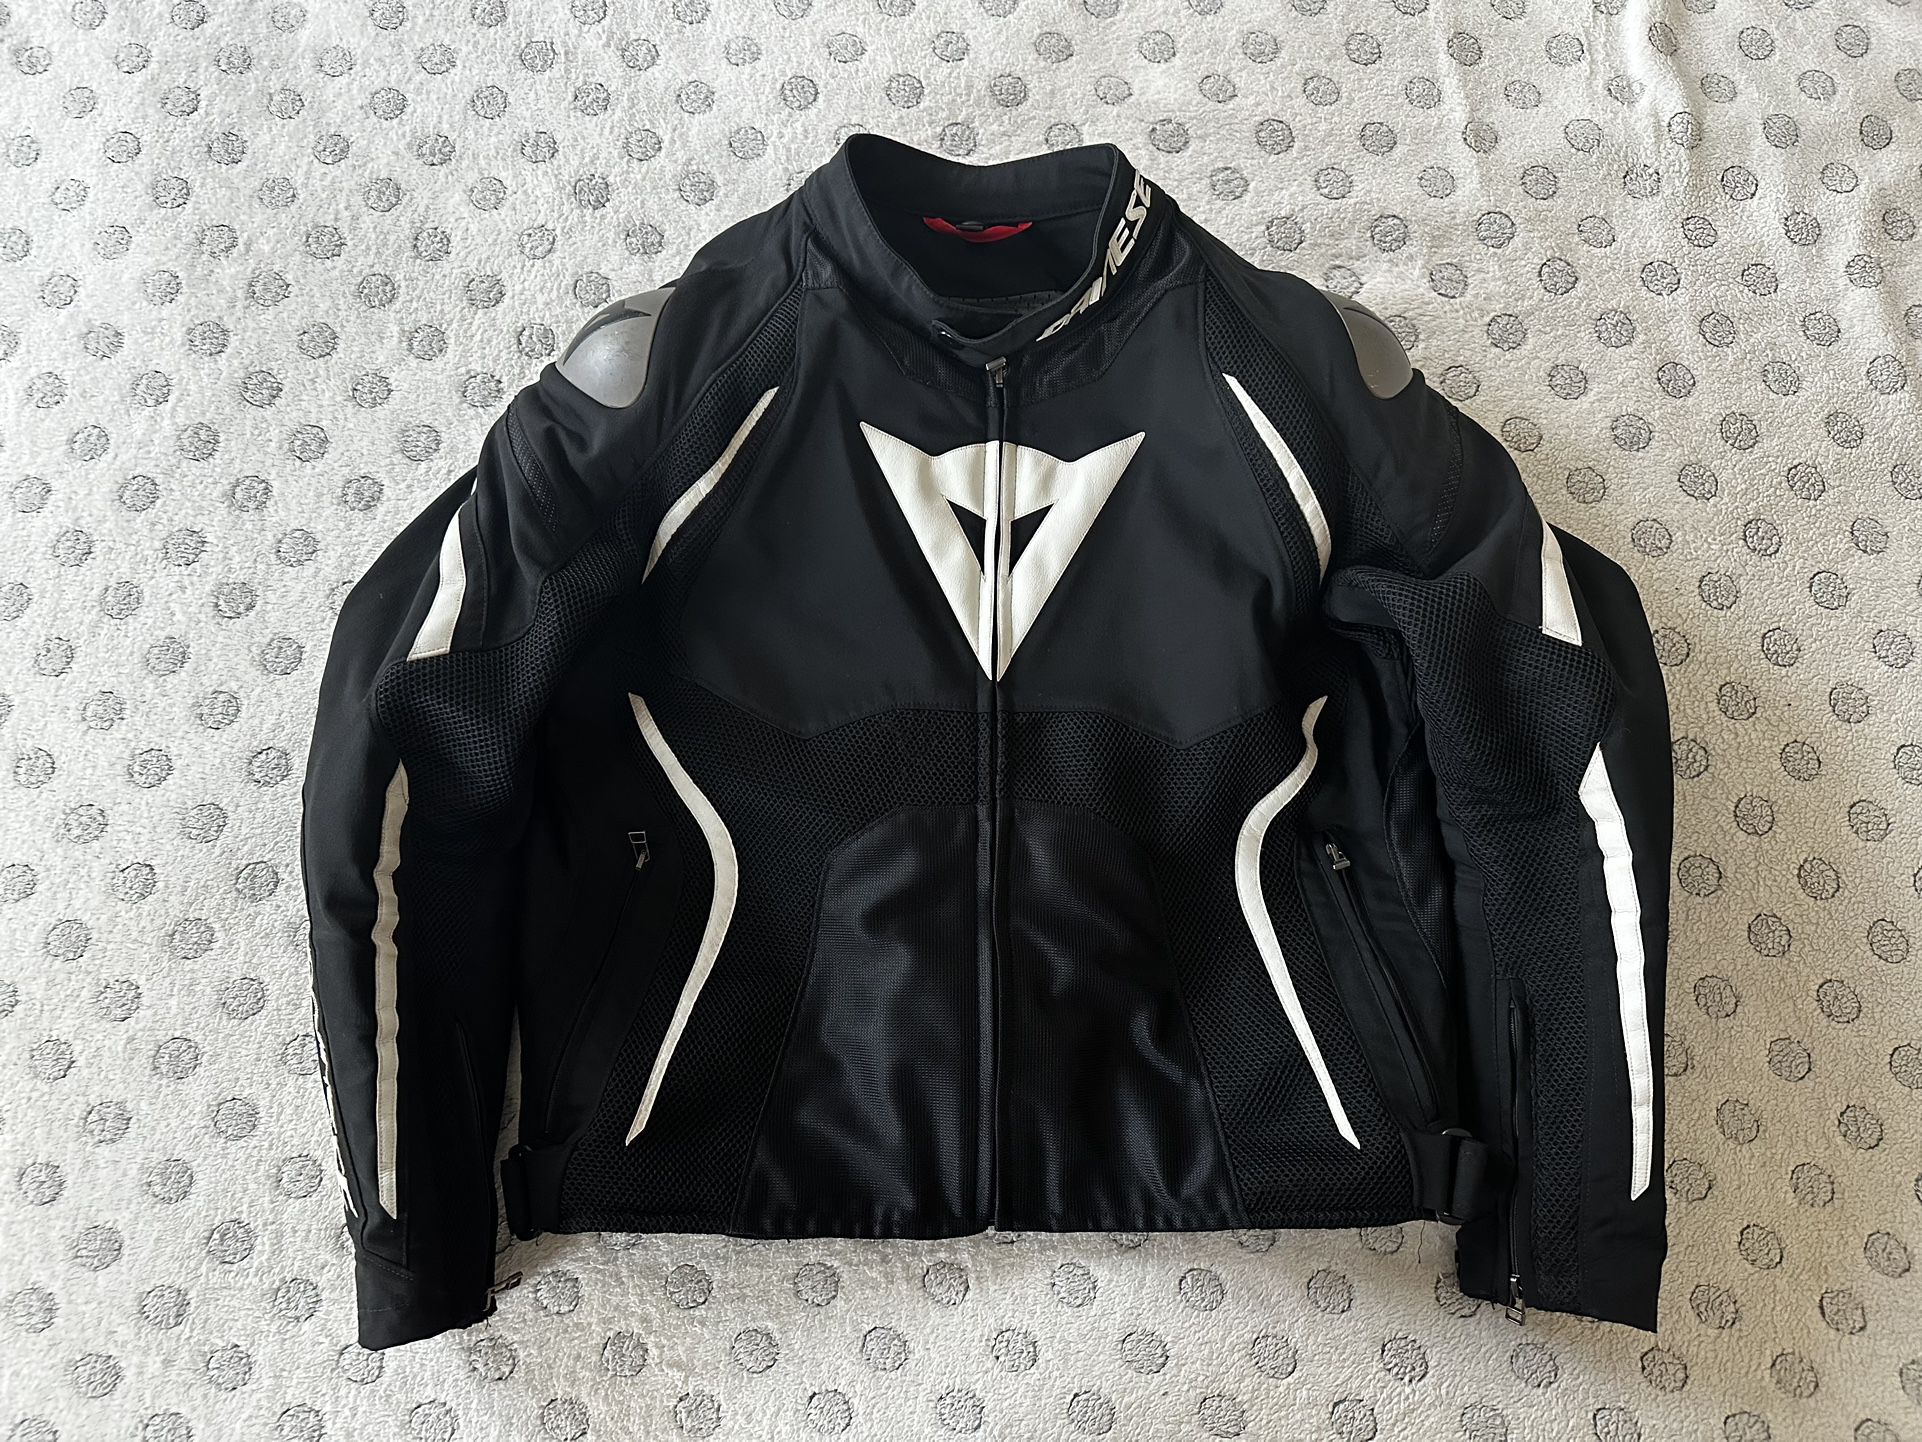 Dainese Estrema Air Textile Racing Motorcycle Jacket Size 56